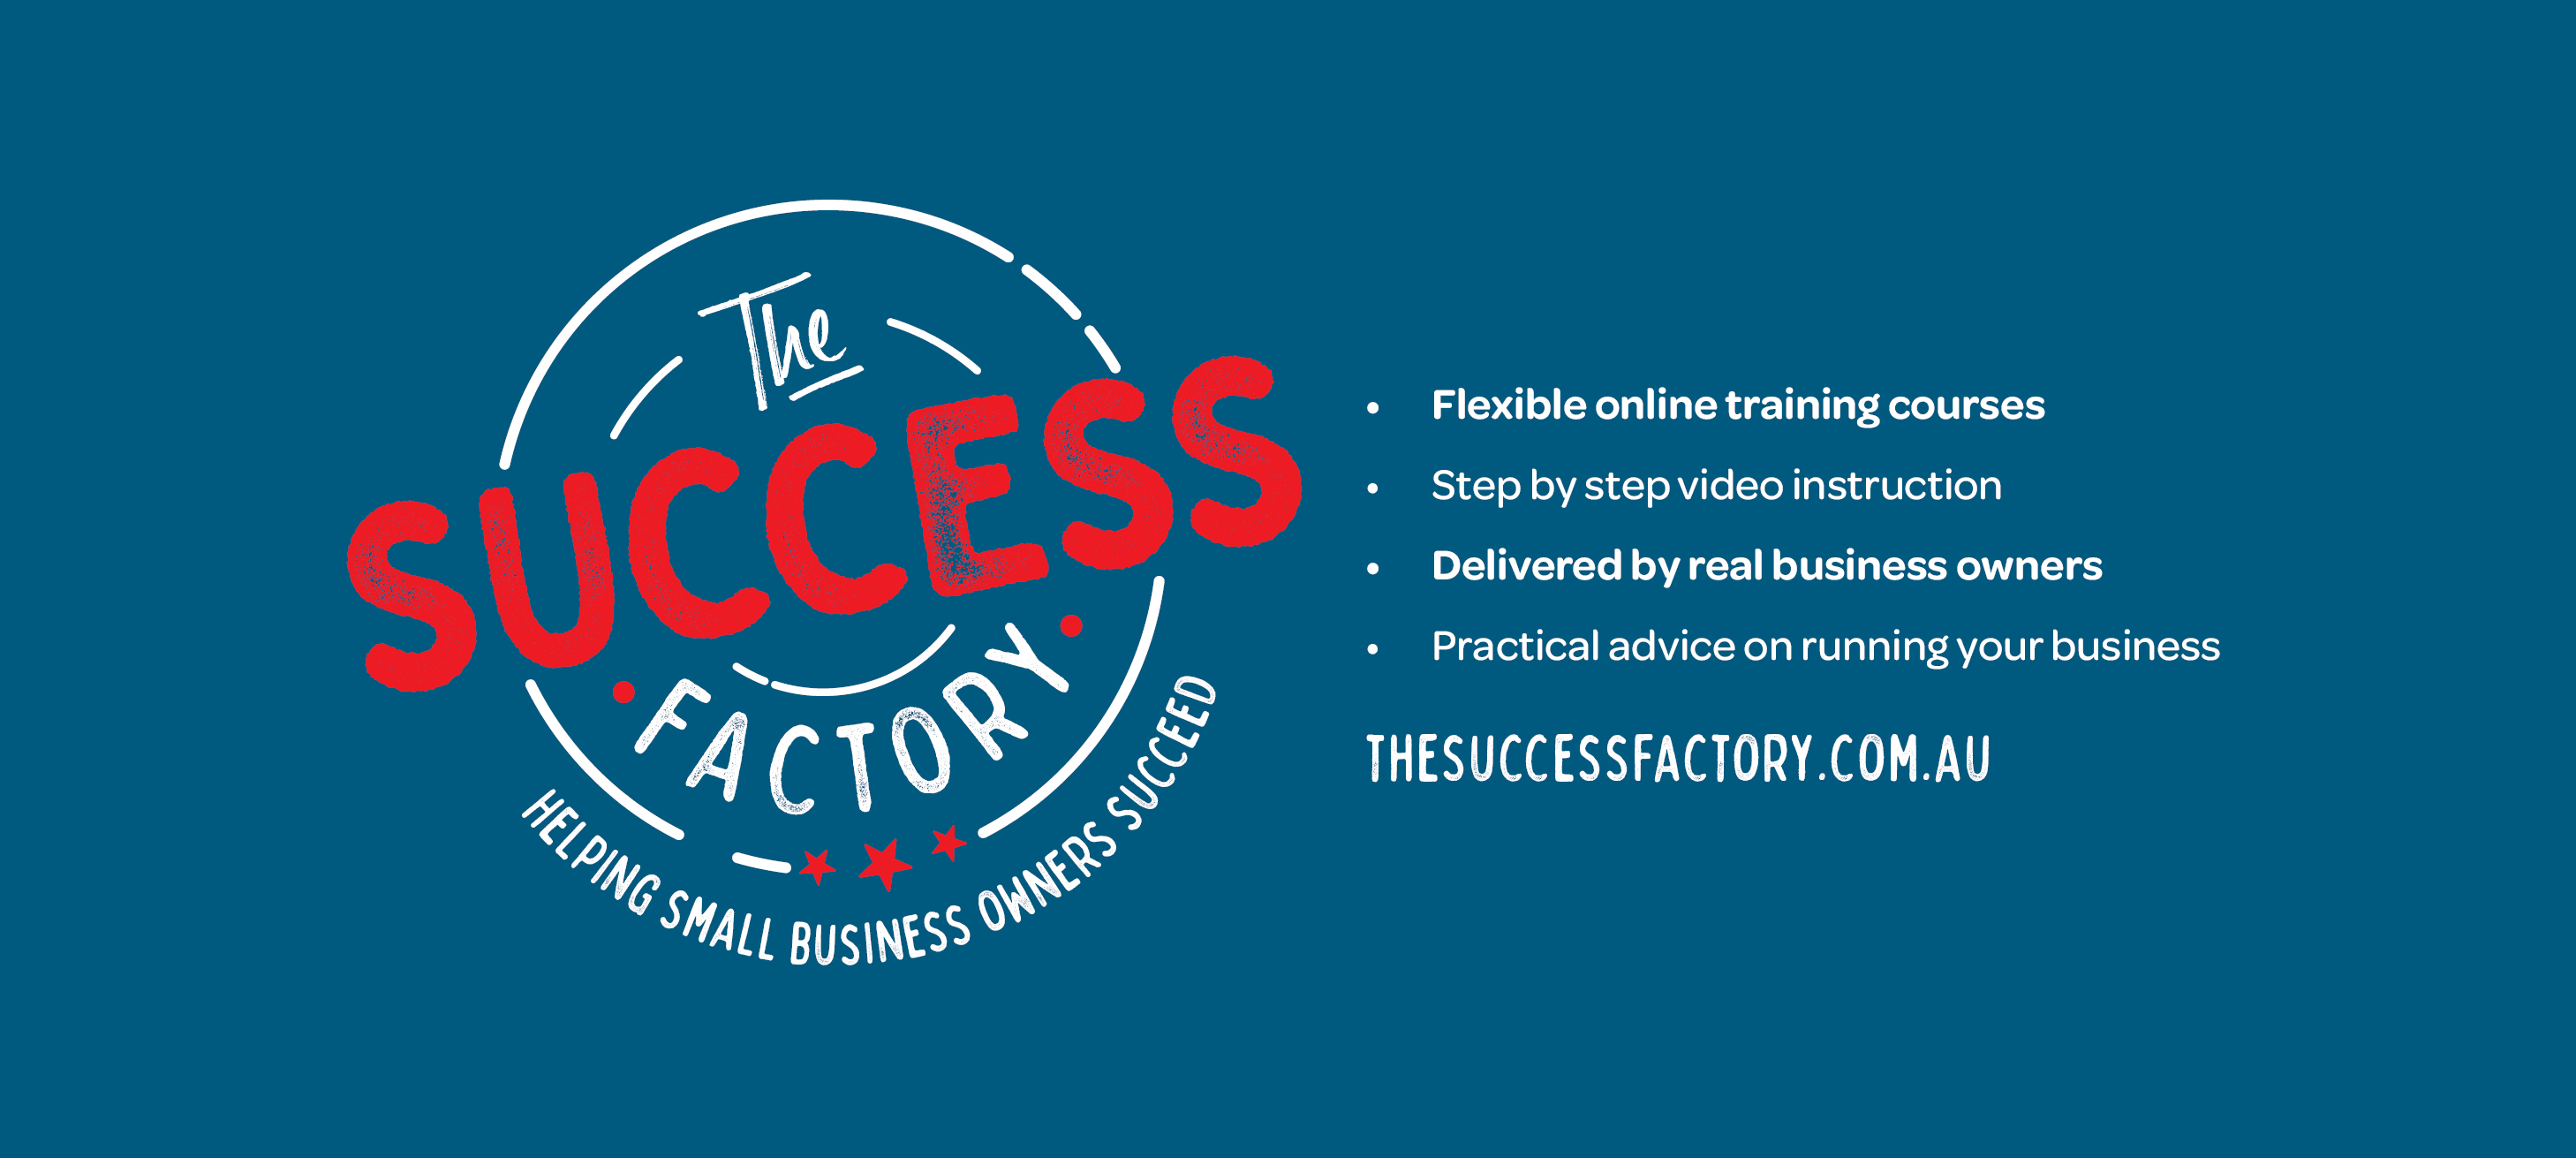 Welcome to The Success Factory